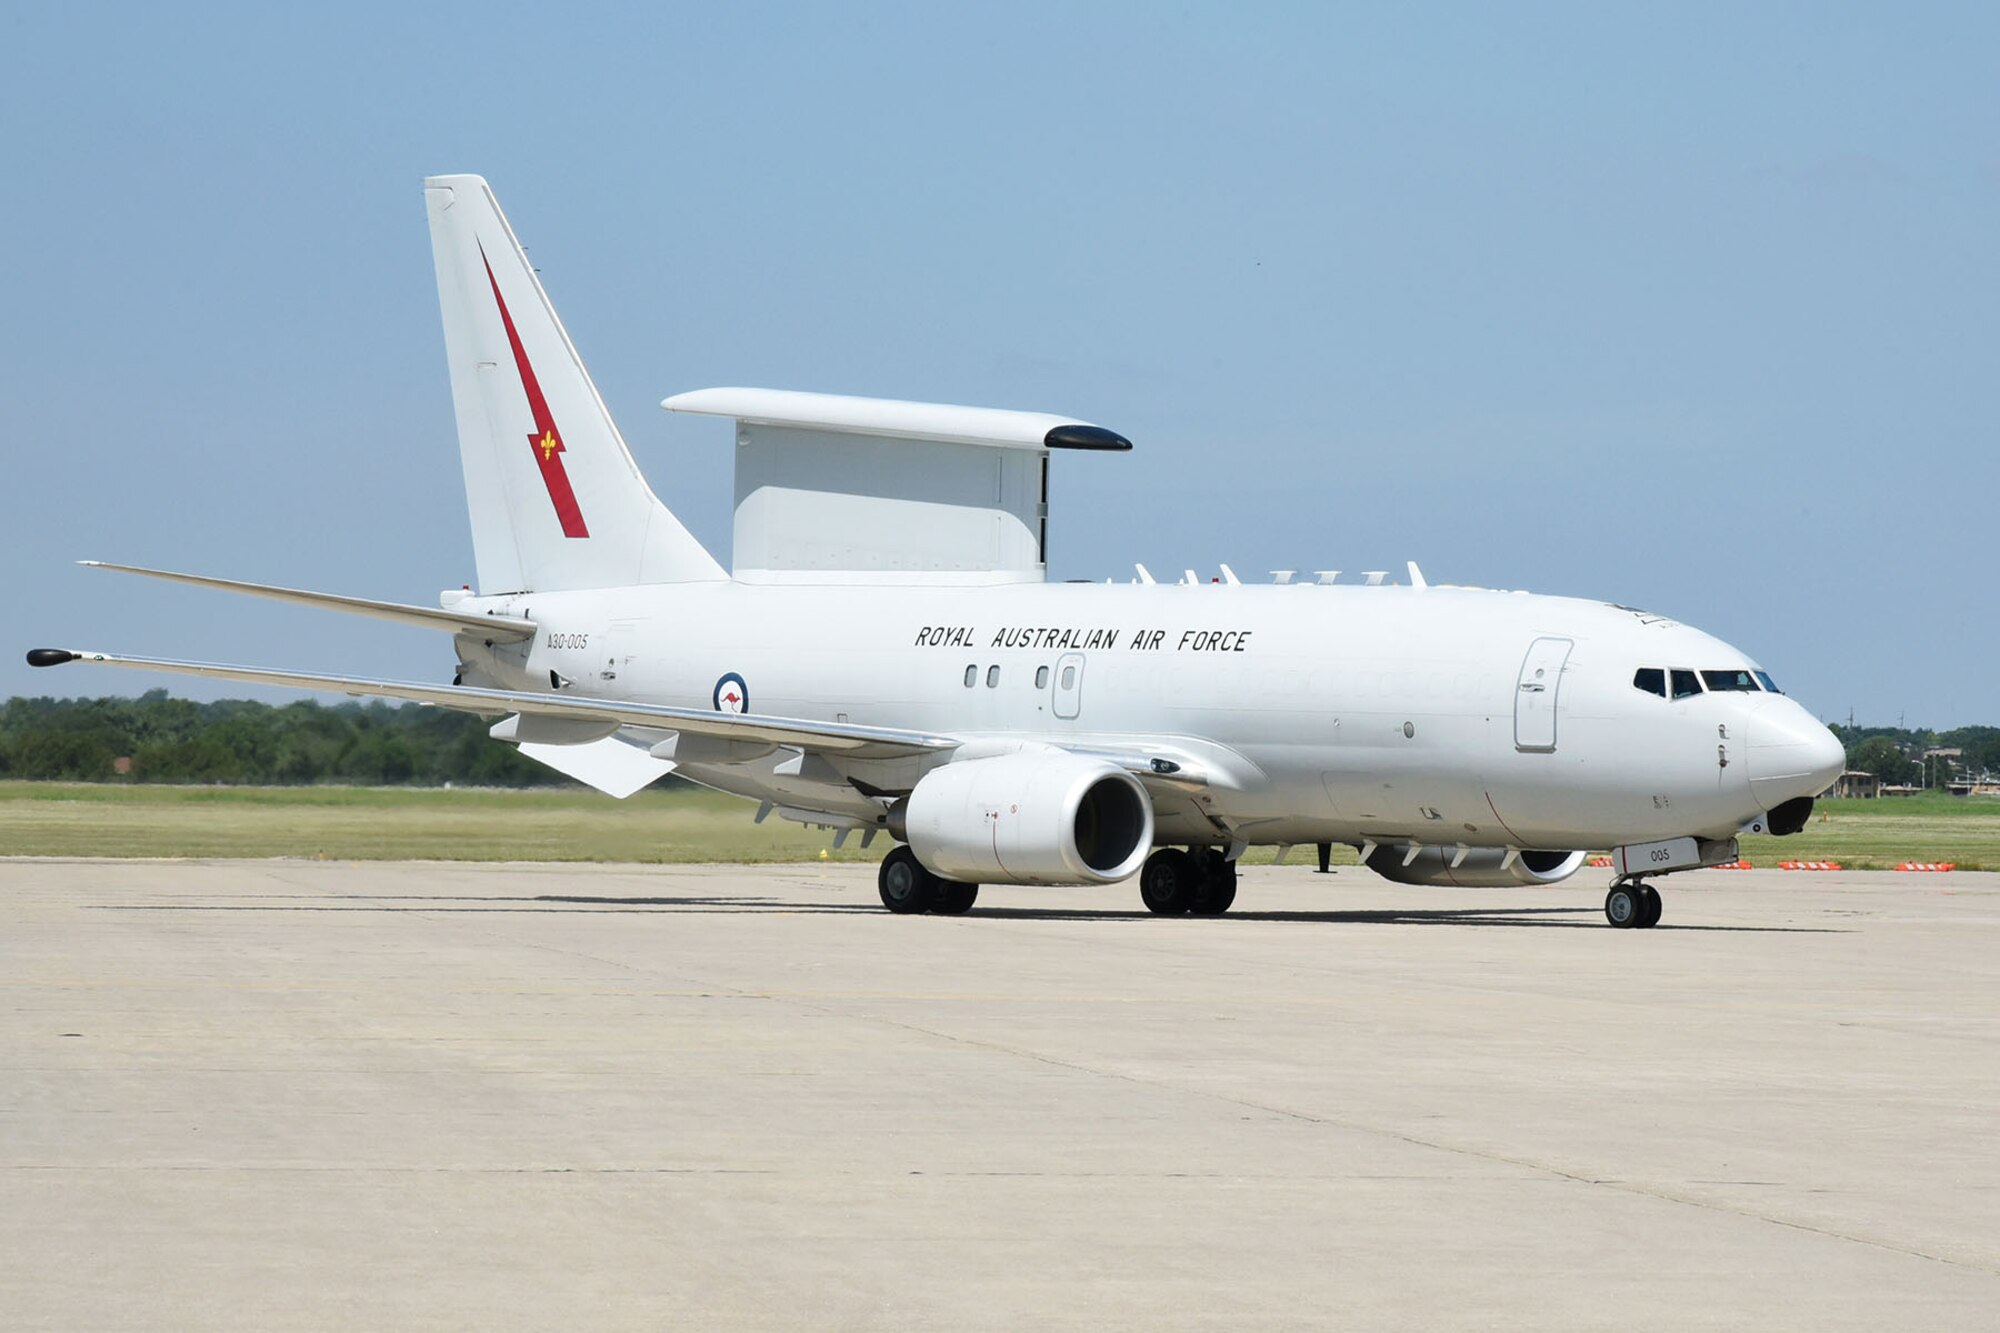 A crew from the Royal Australian Air Force flew one of their E-7A "Wedgetail" AEW&C (Airborne Early Warning and Control) aircraft into Tinker July 13. Wing Commander Mike "Mango" Bowen met with the 552nd Air Control Wing Director of Staff Lt. Col. Brian Donehue to discuss with reporters their new exchange program between the two wings.